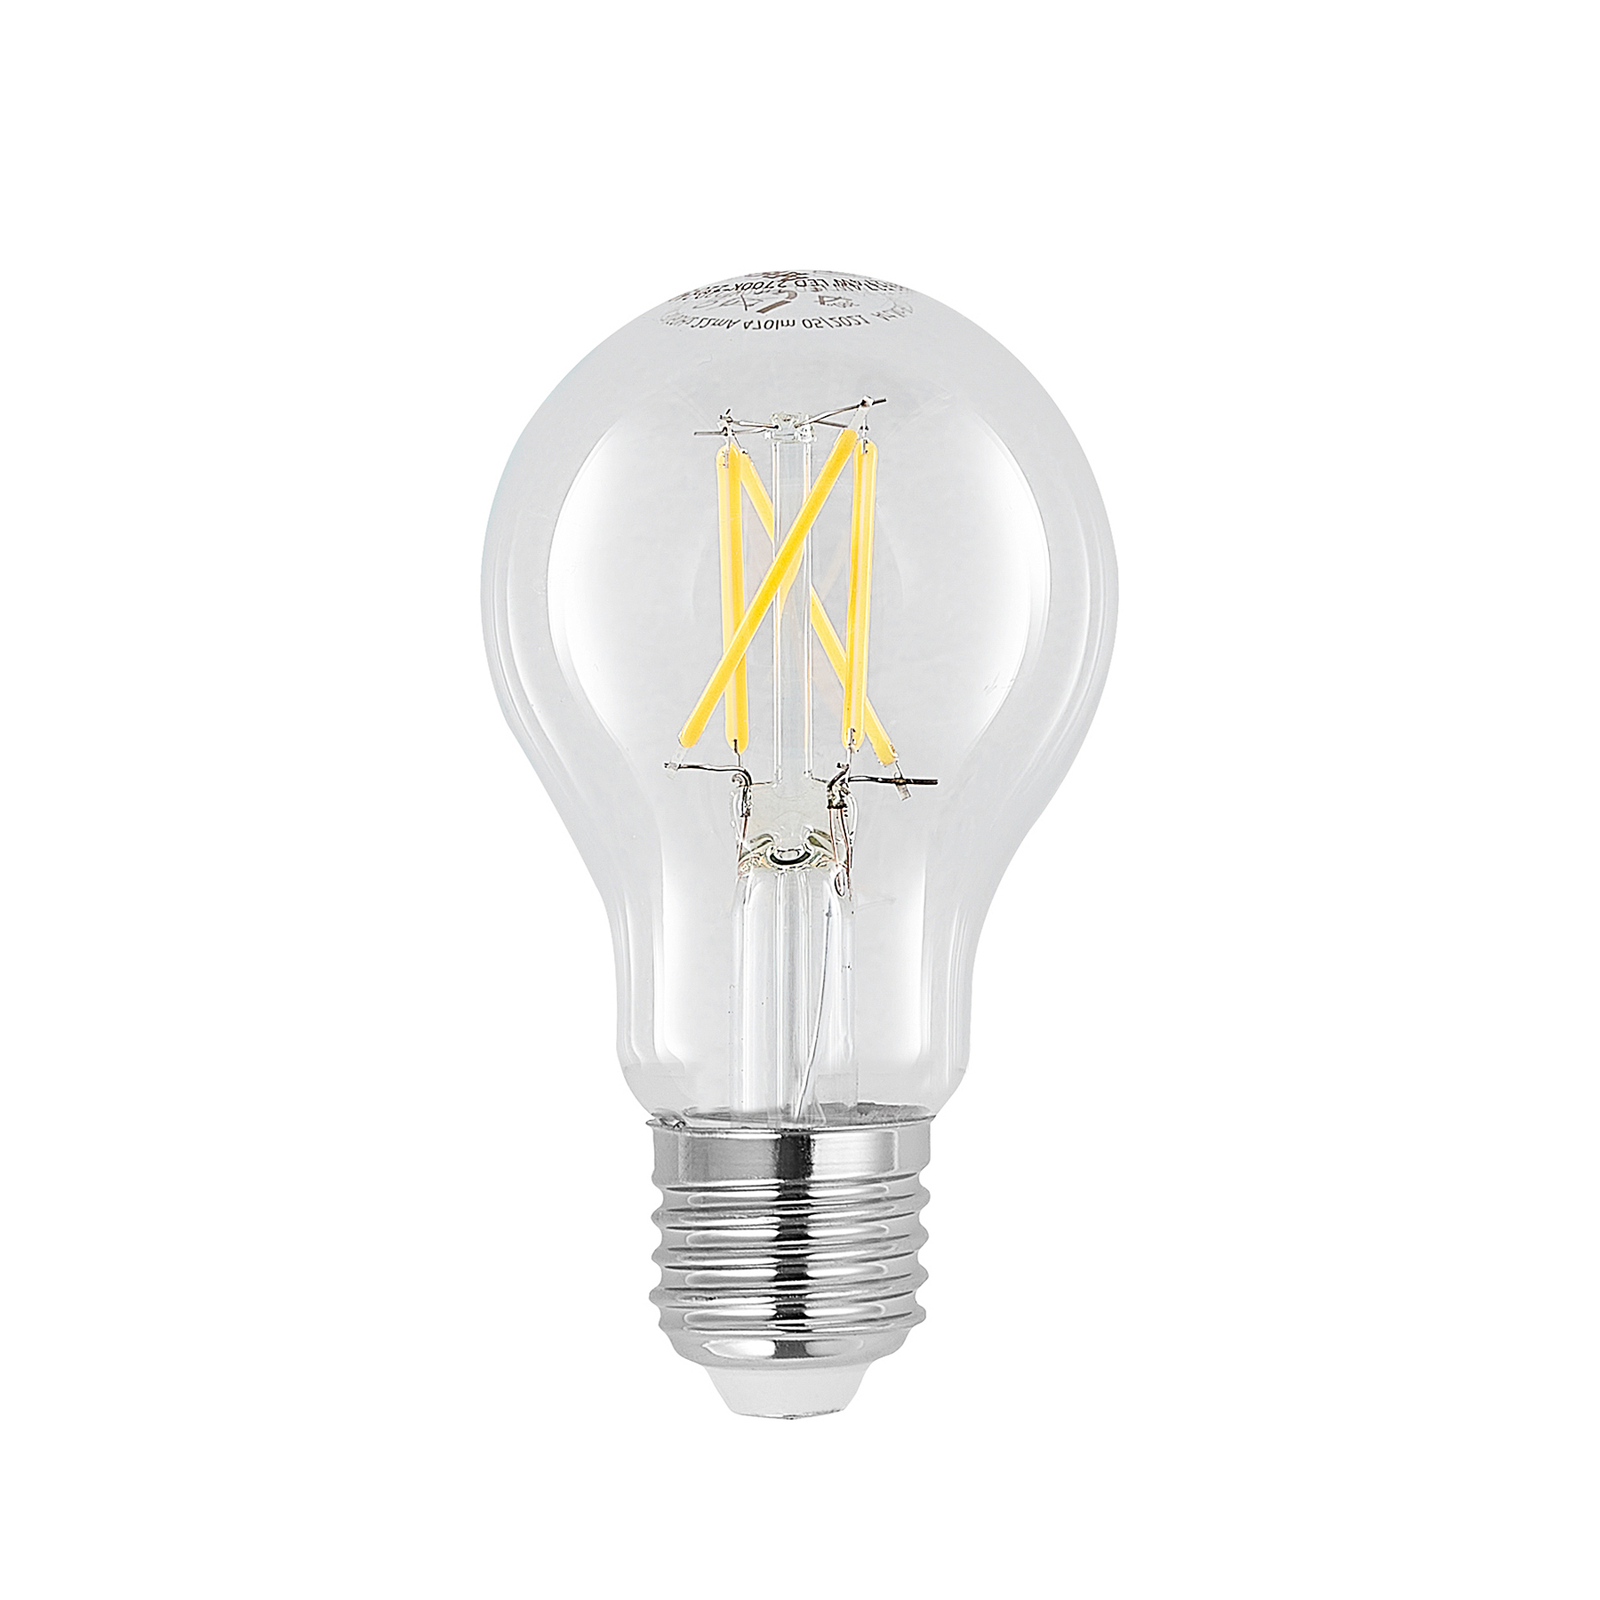 LED bulb E27 8W 2700K filament, dimmable, clear